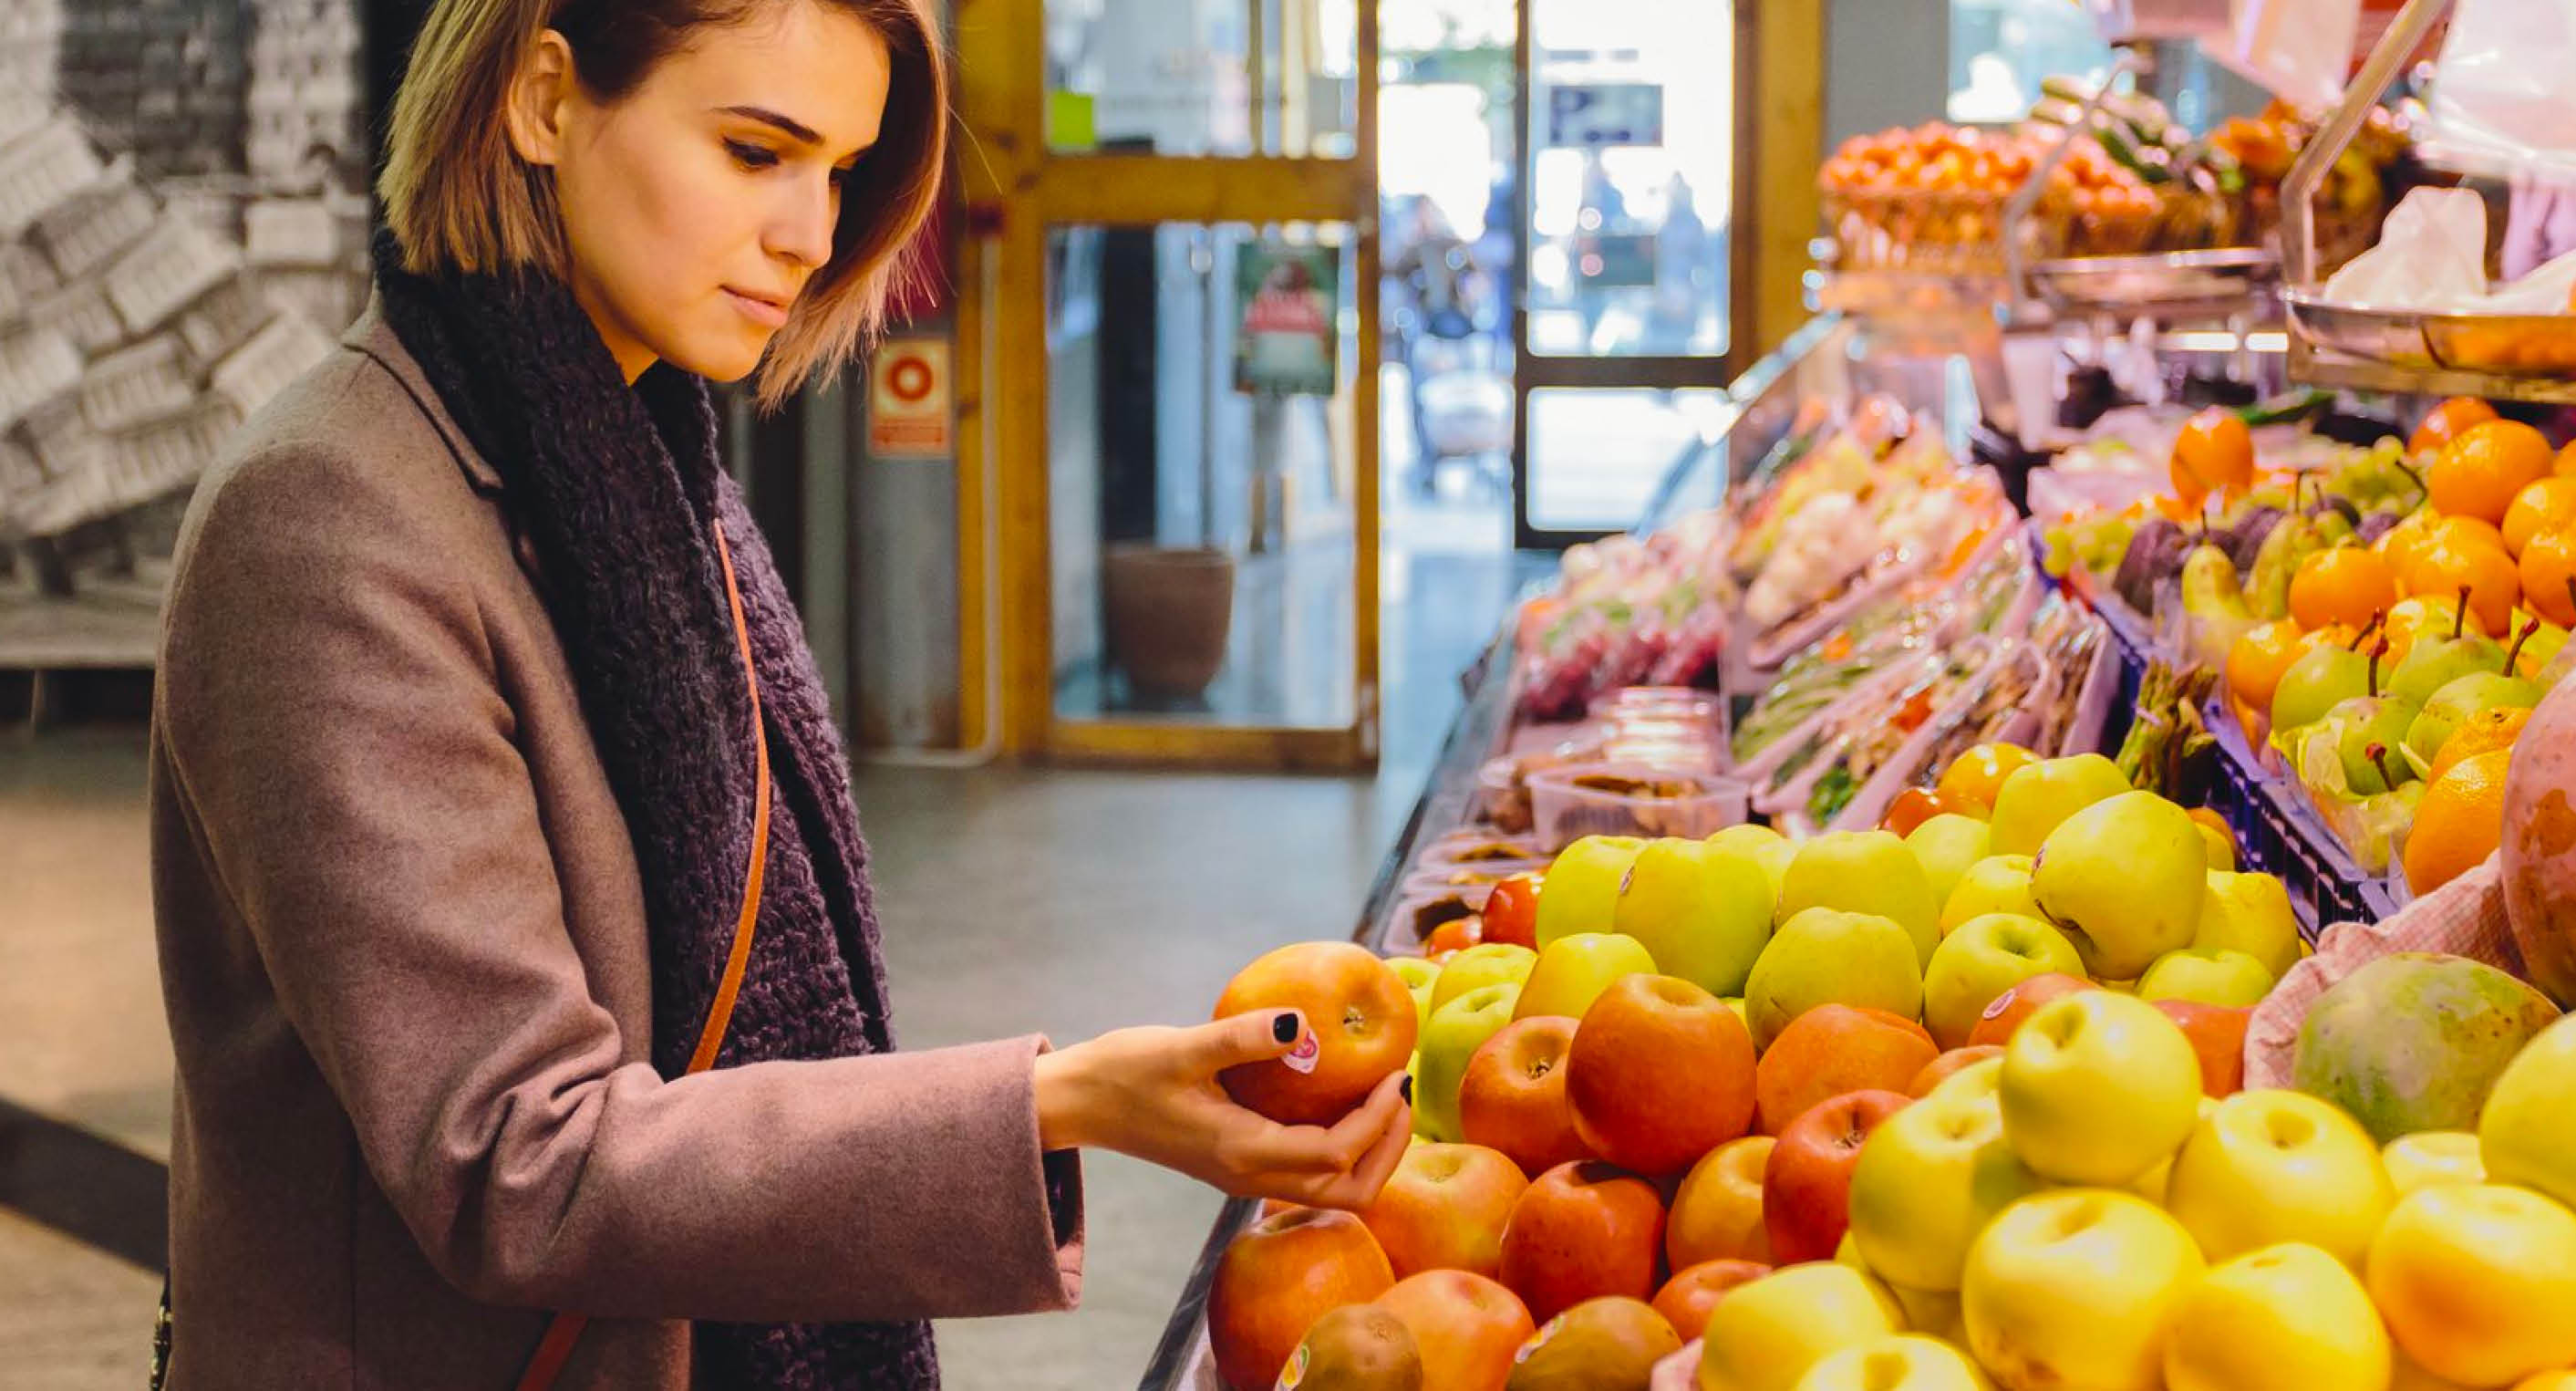 Girl deciding whether to get fruits or not